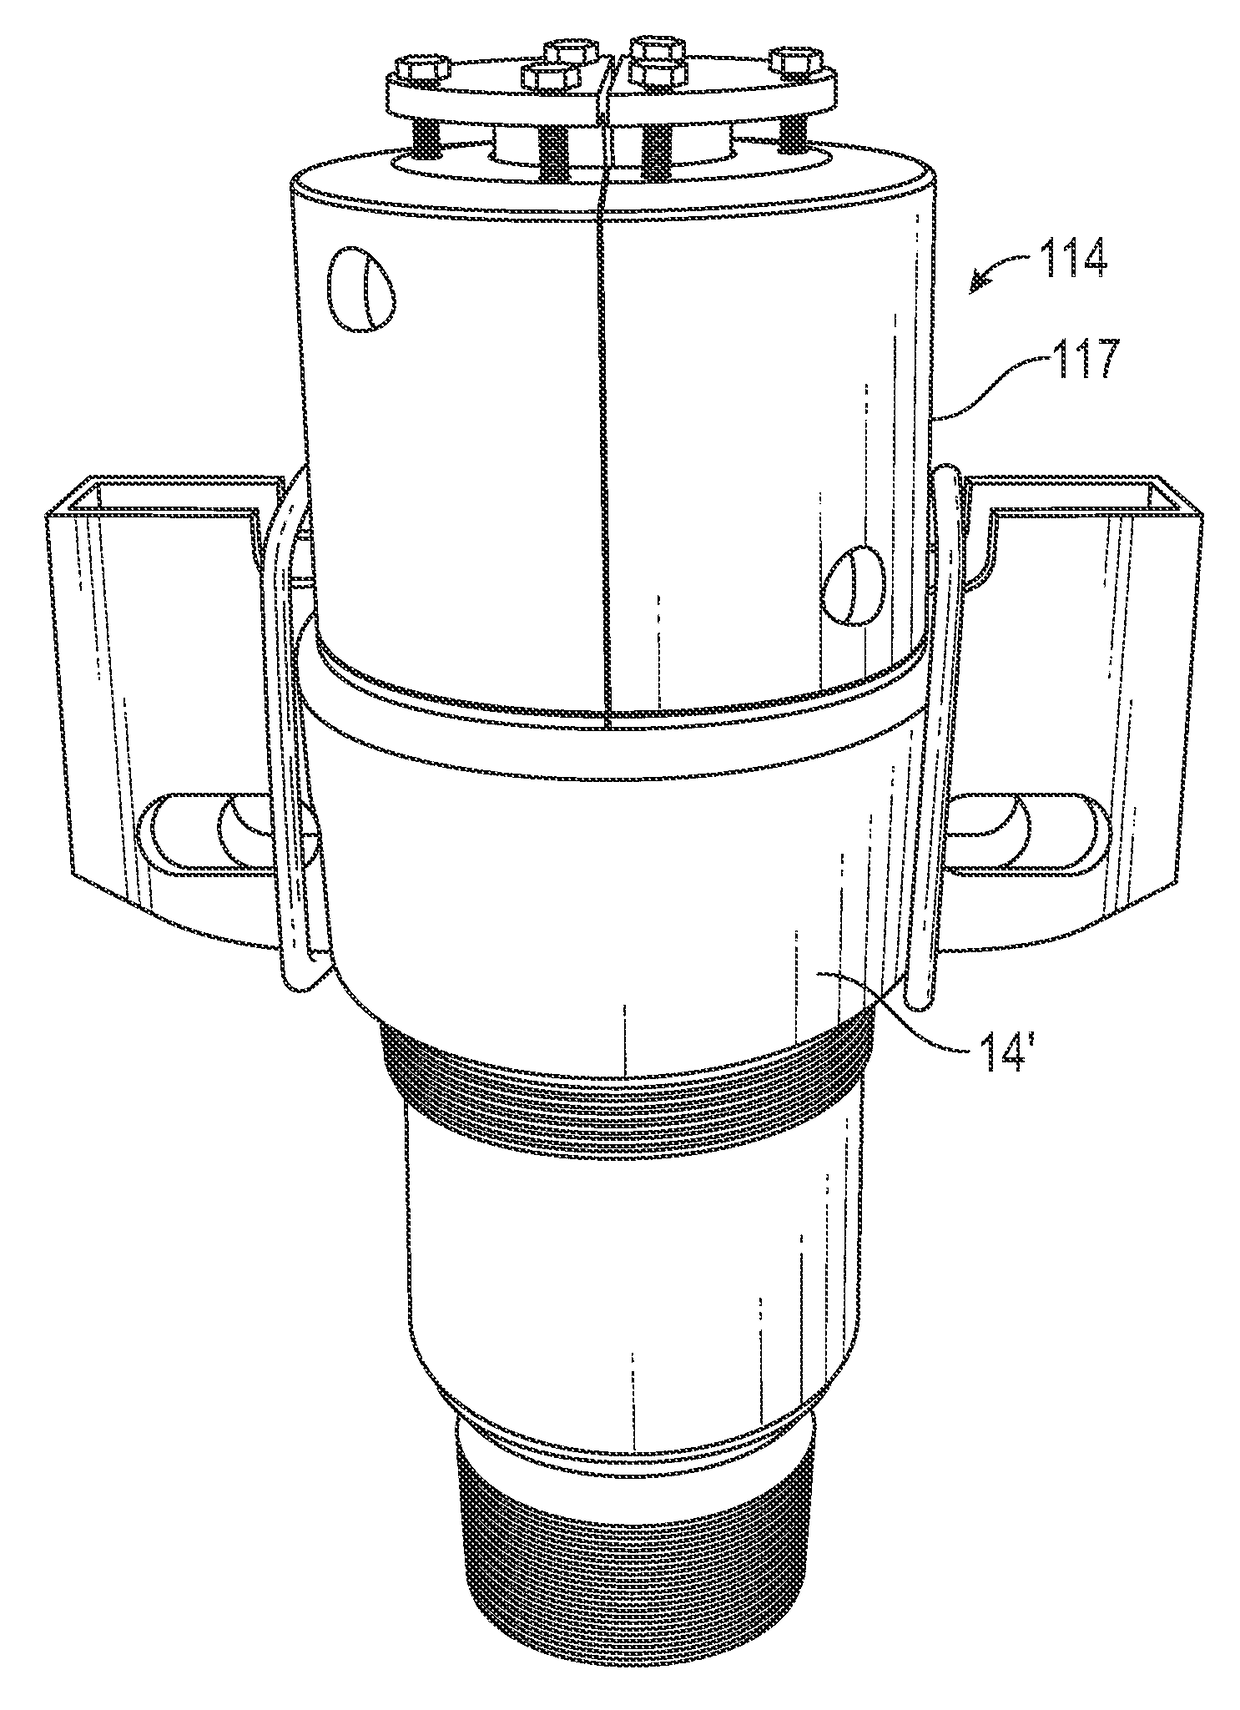 Apparatus for automatically lubricating an oil well sucker rod stuffing box